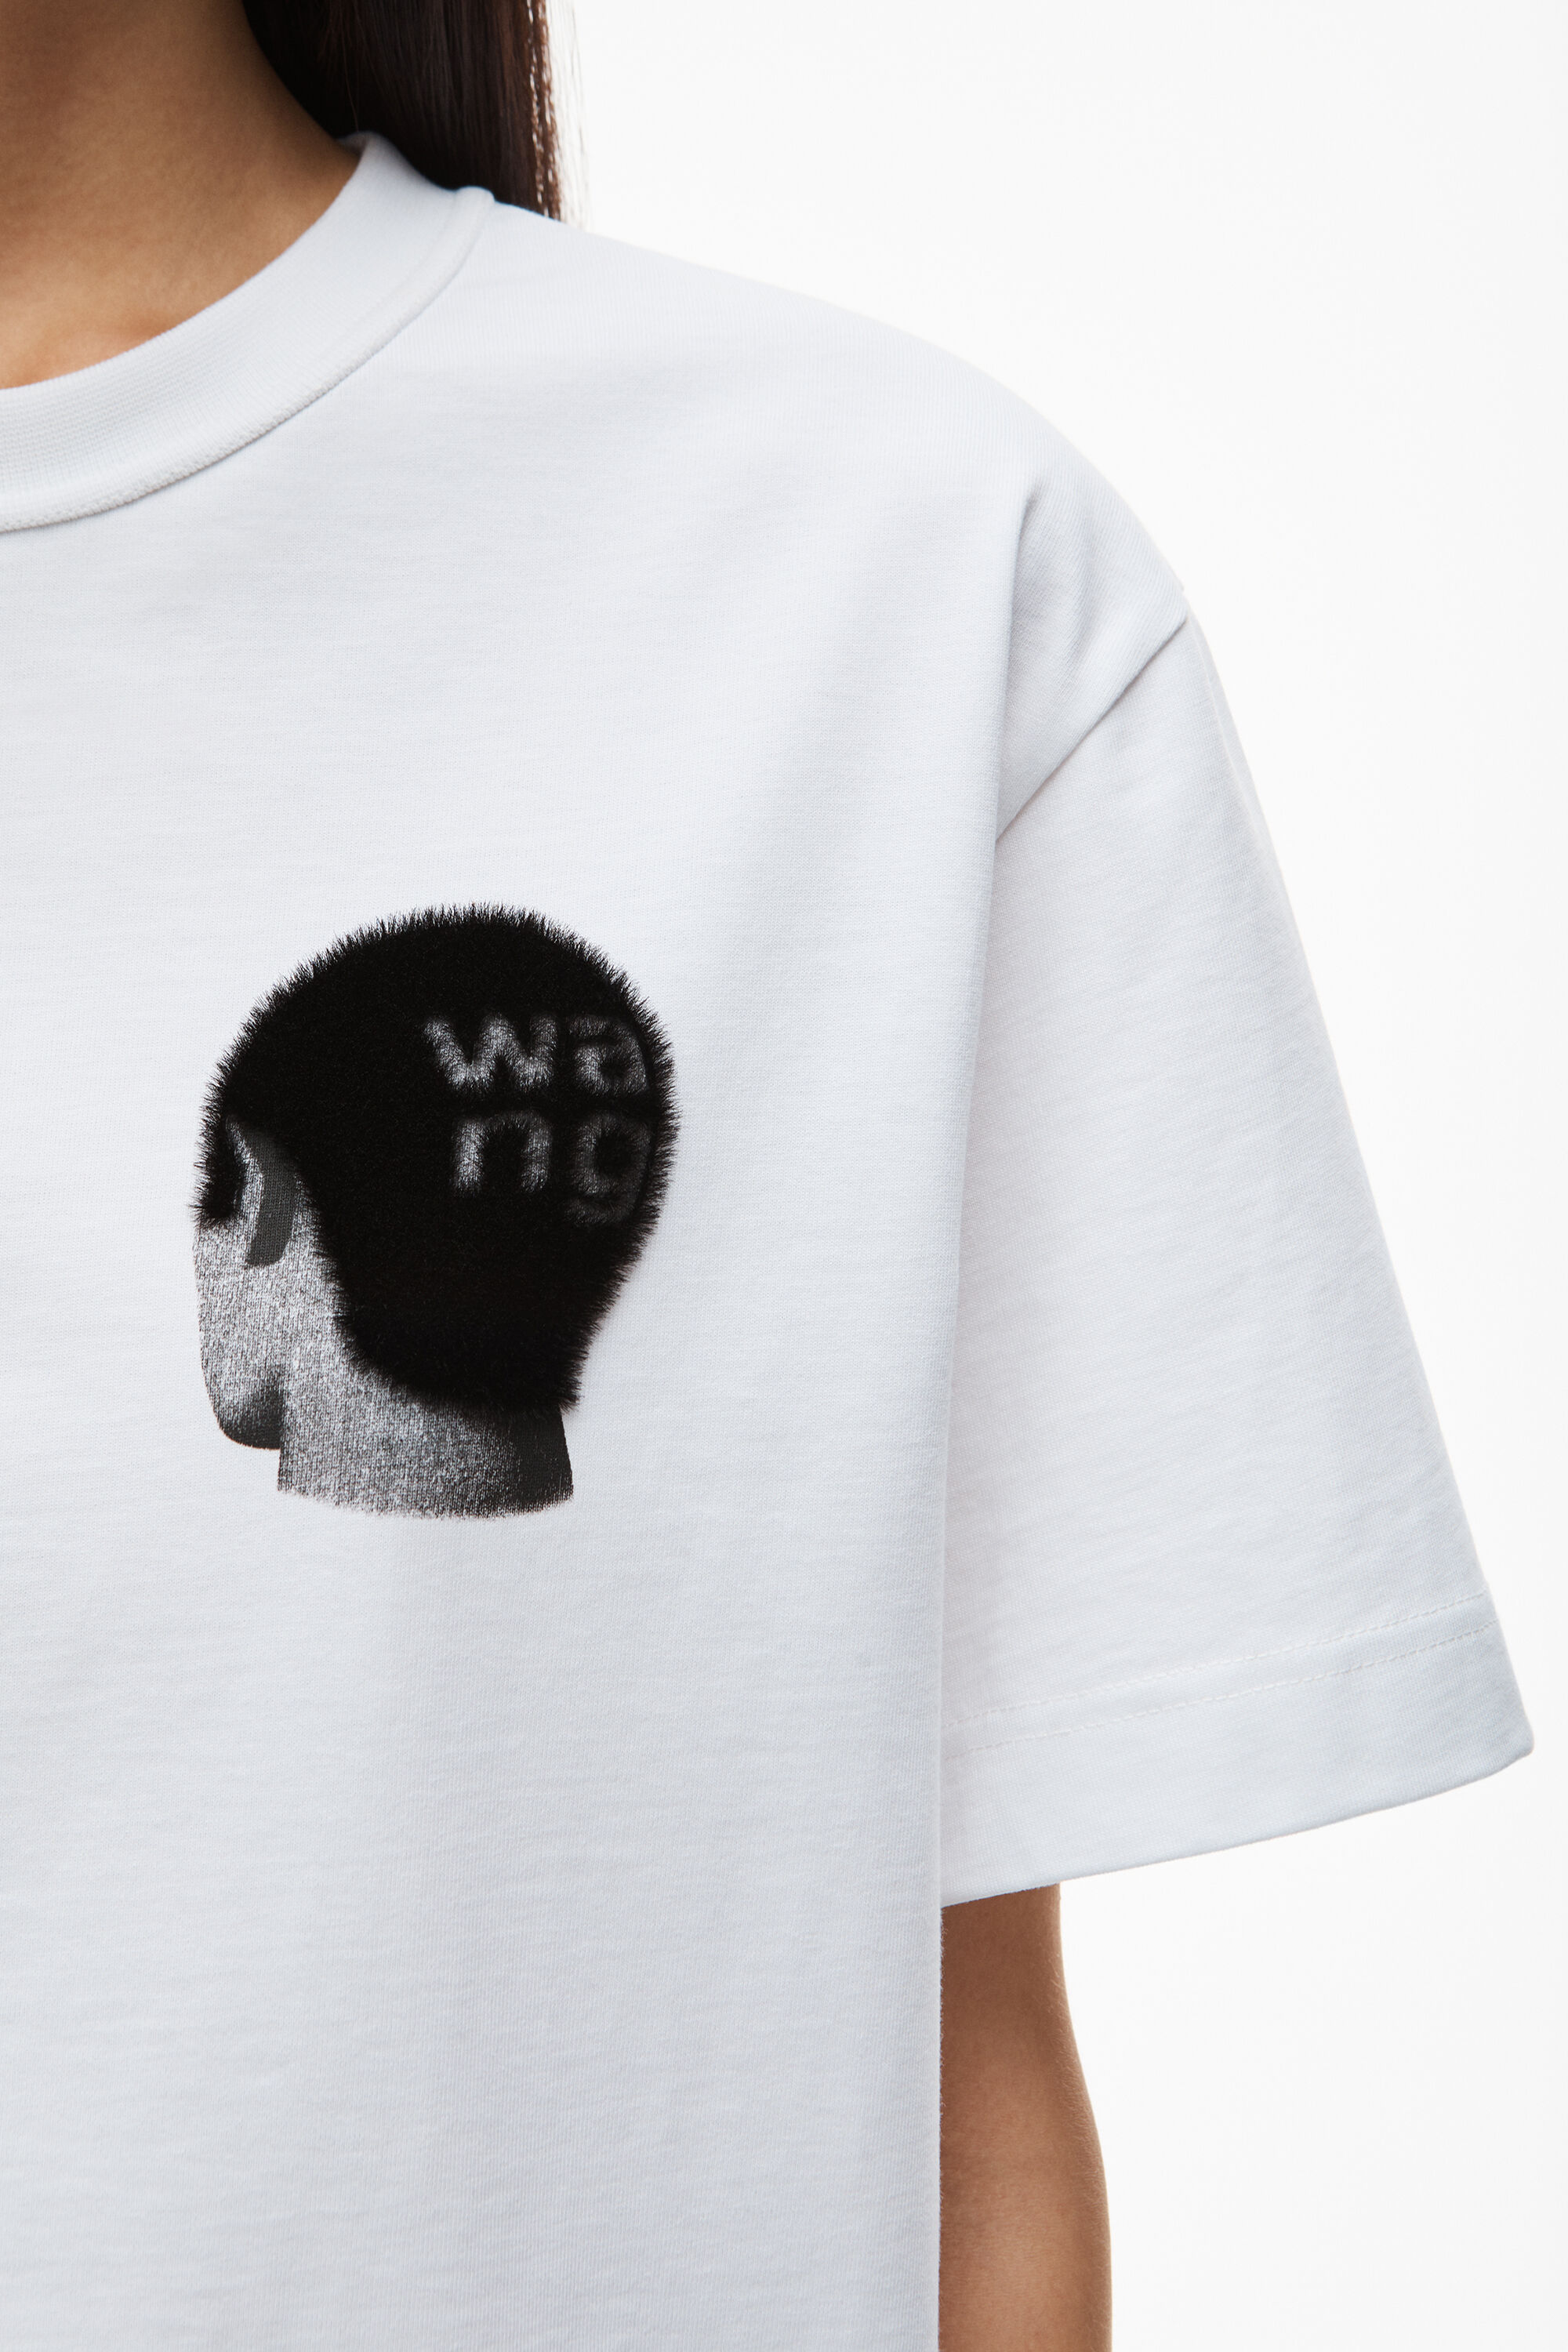 alexanderwang BUZZ CUT GRAPHIC TEE IN COMPACT JERSEY BRIGHT WHITE 